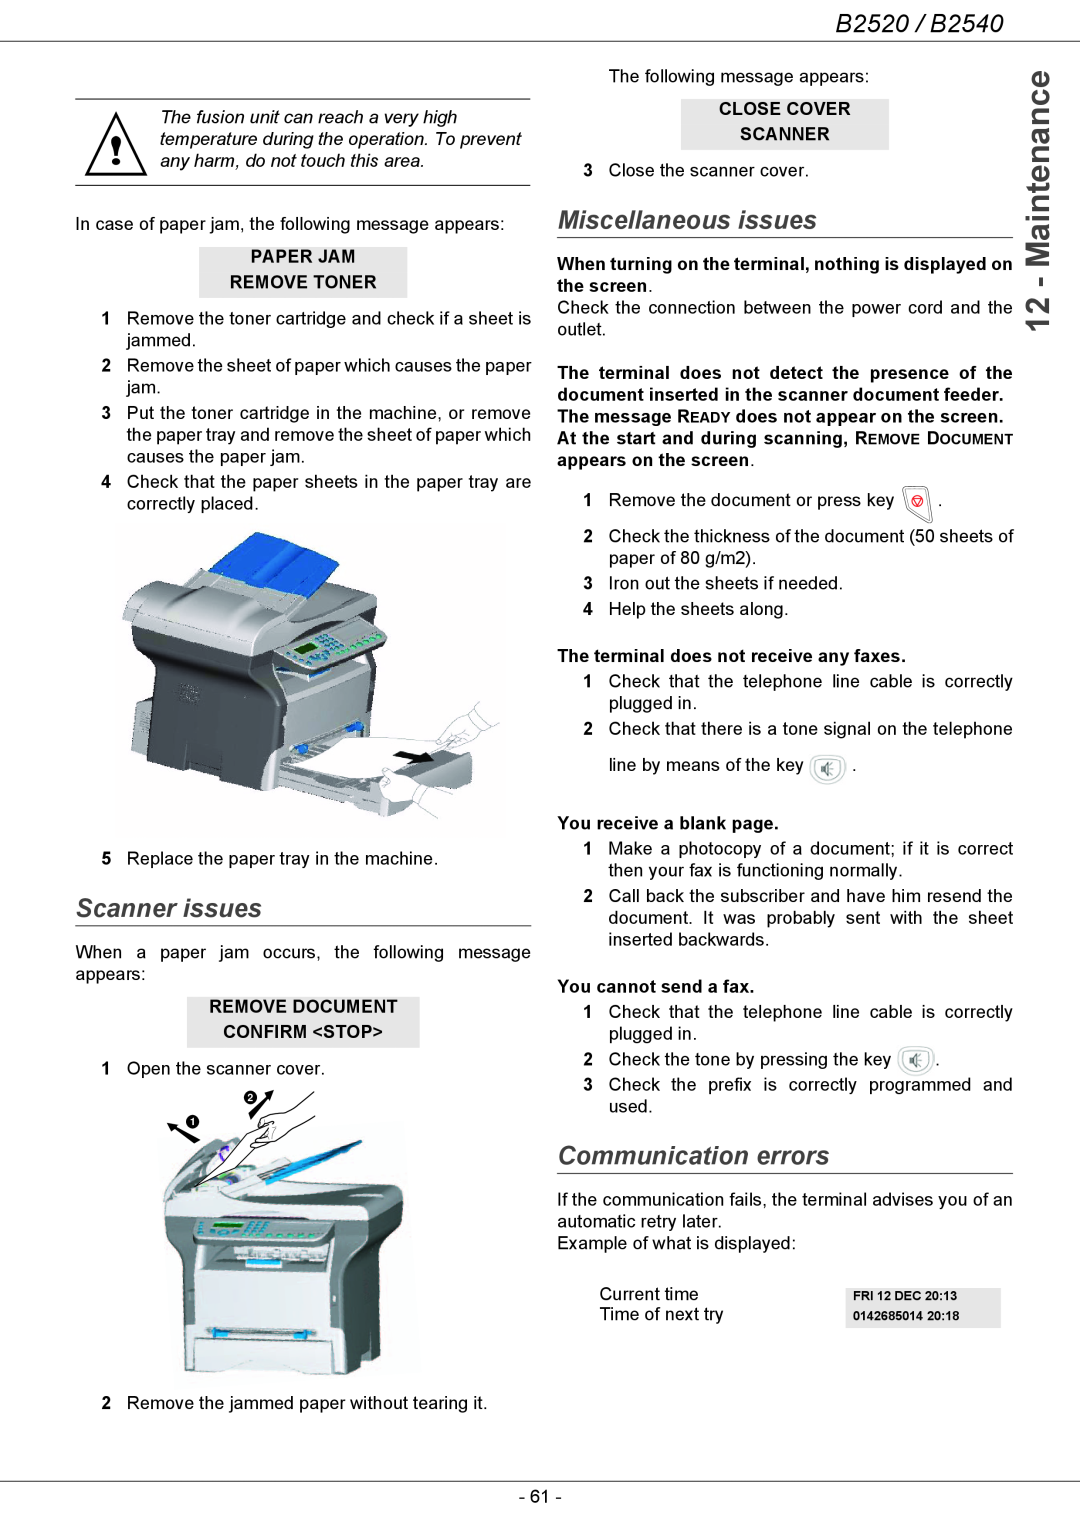 Oki B2500 Series Scanner issues, Miscellaneous issues, Communication errors, Paper Jam Remove Toner, the screen, outlet 